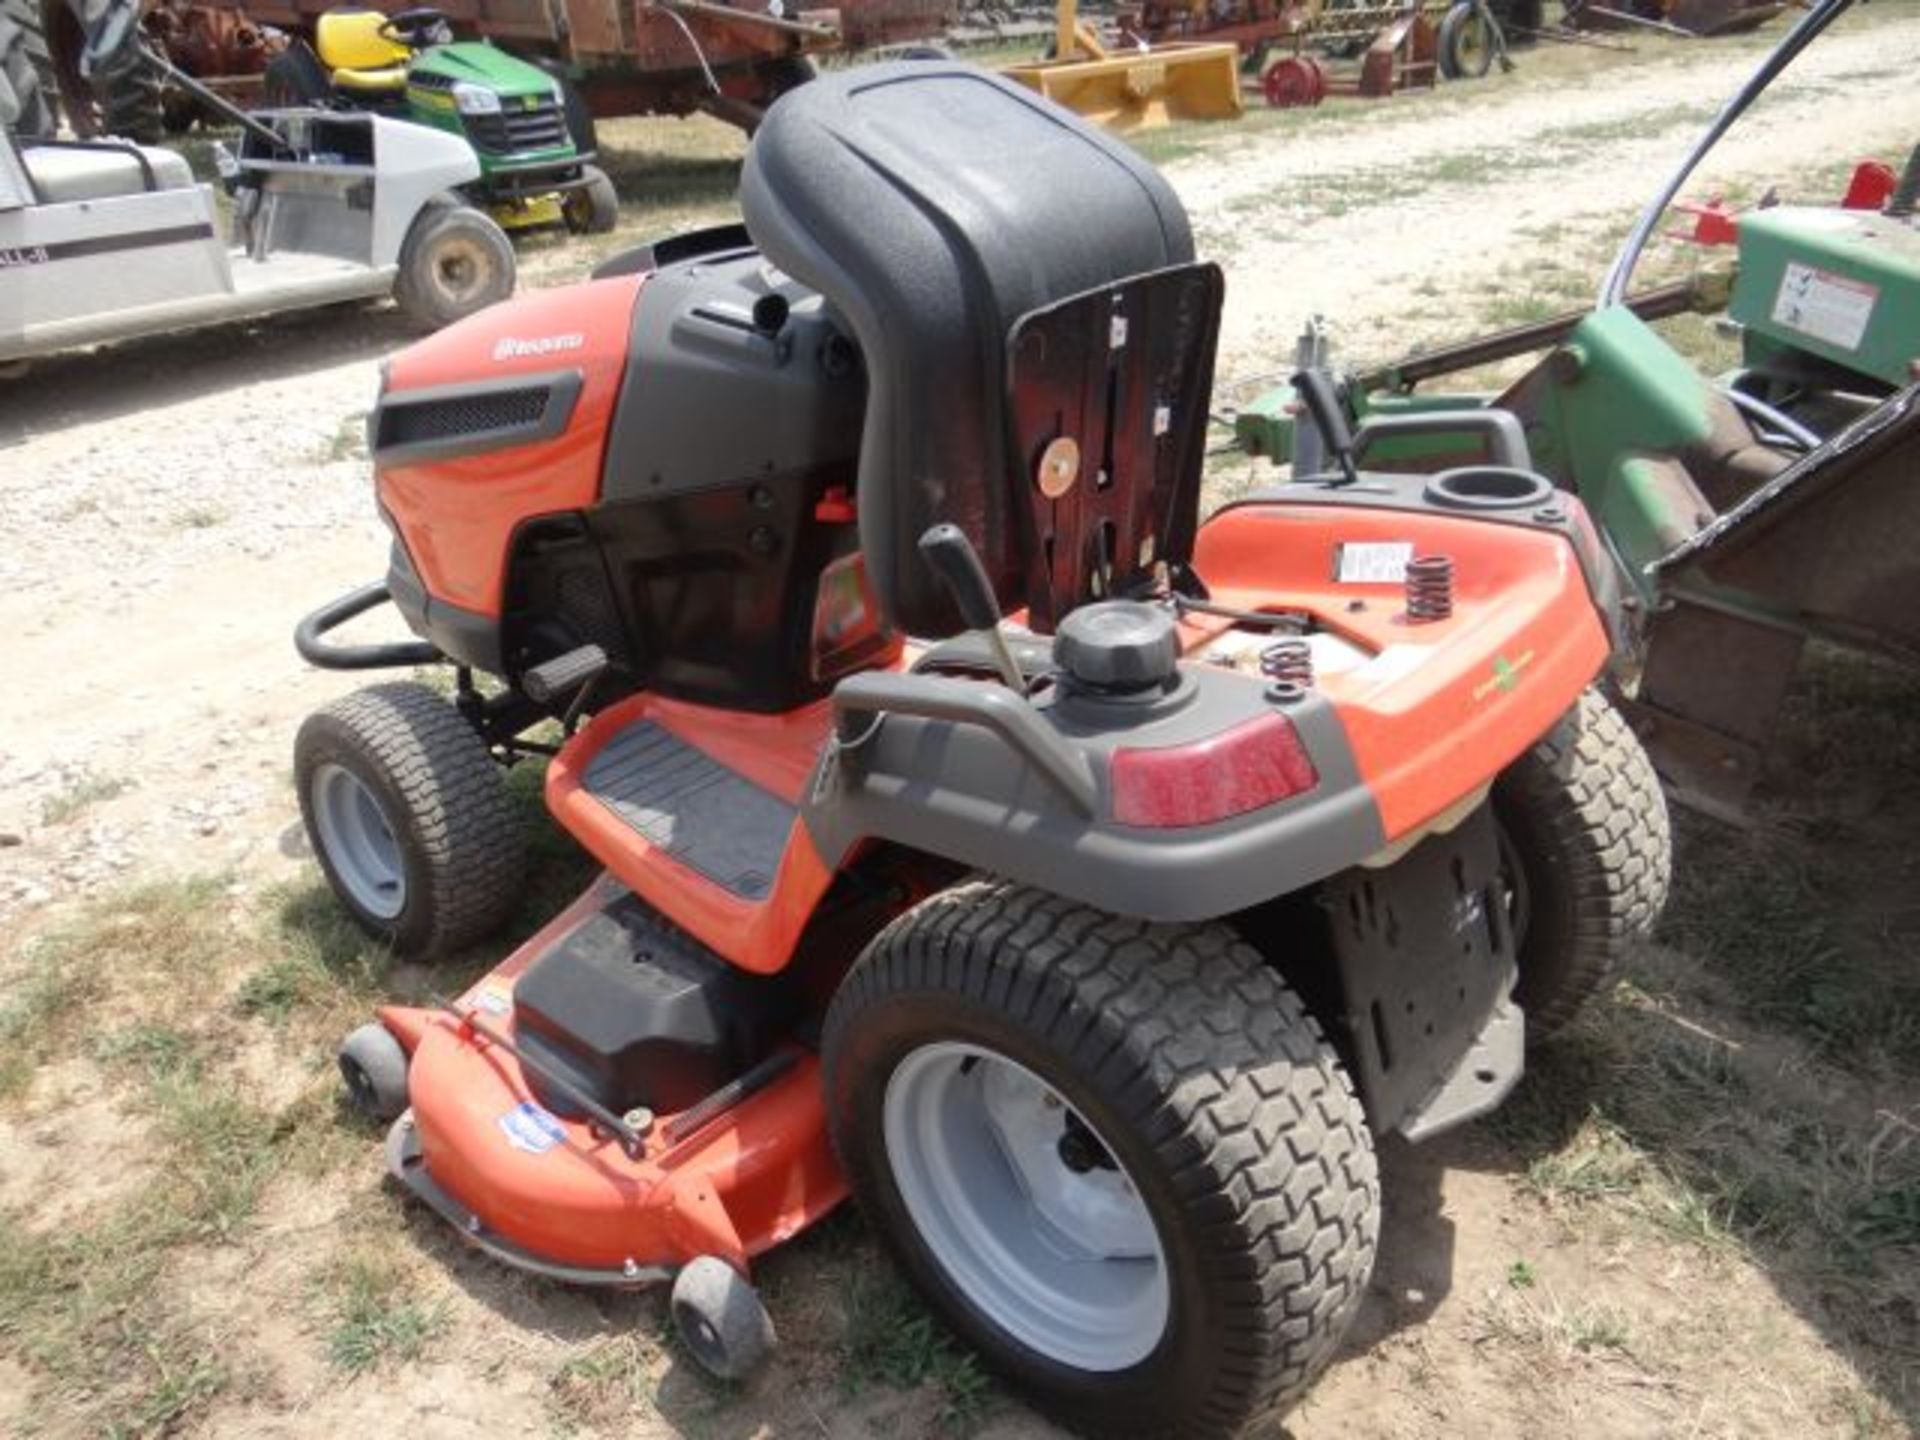 Husqvarna LGT265 Riding Mower, 2014 #64986, 211 hrs, 26hp Kohler, 54" Deck, Hydro, Manual in the - Image 3 of 3